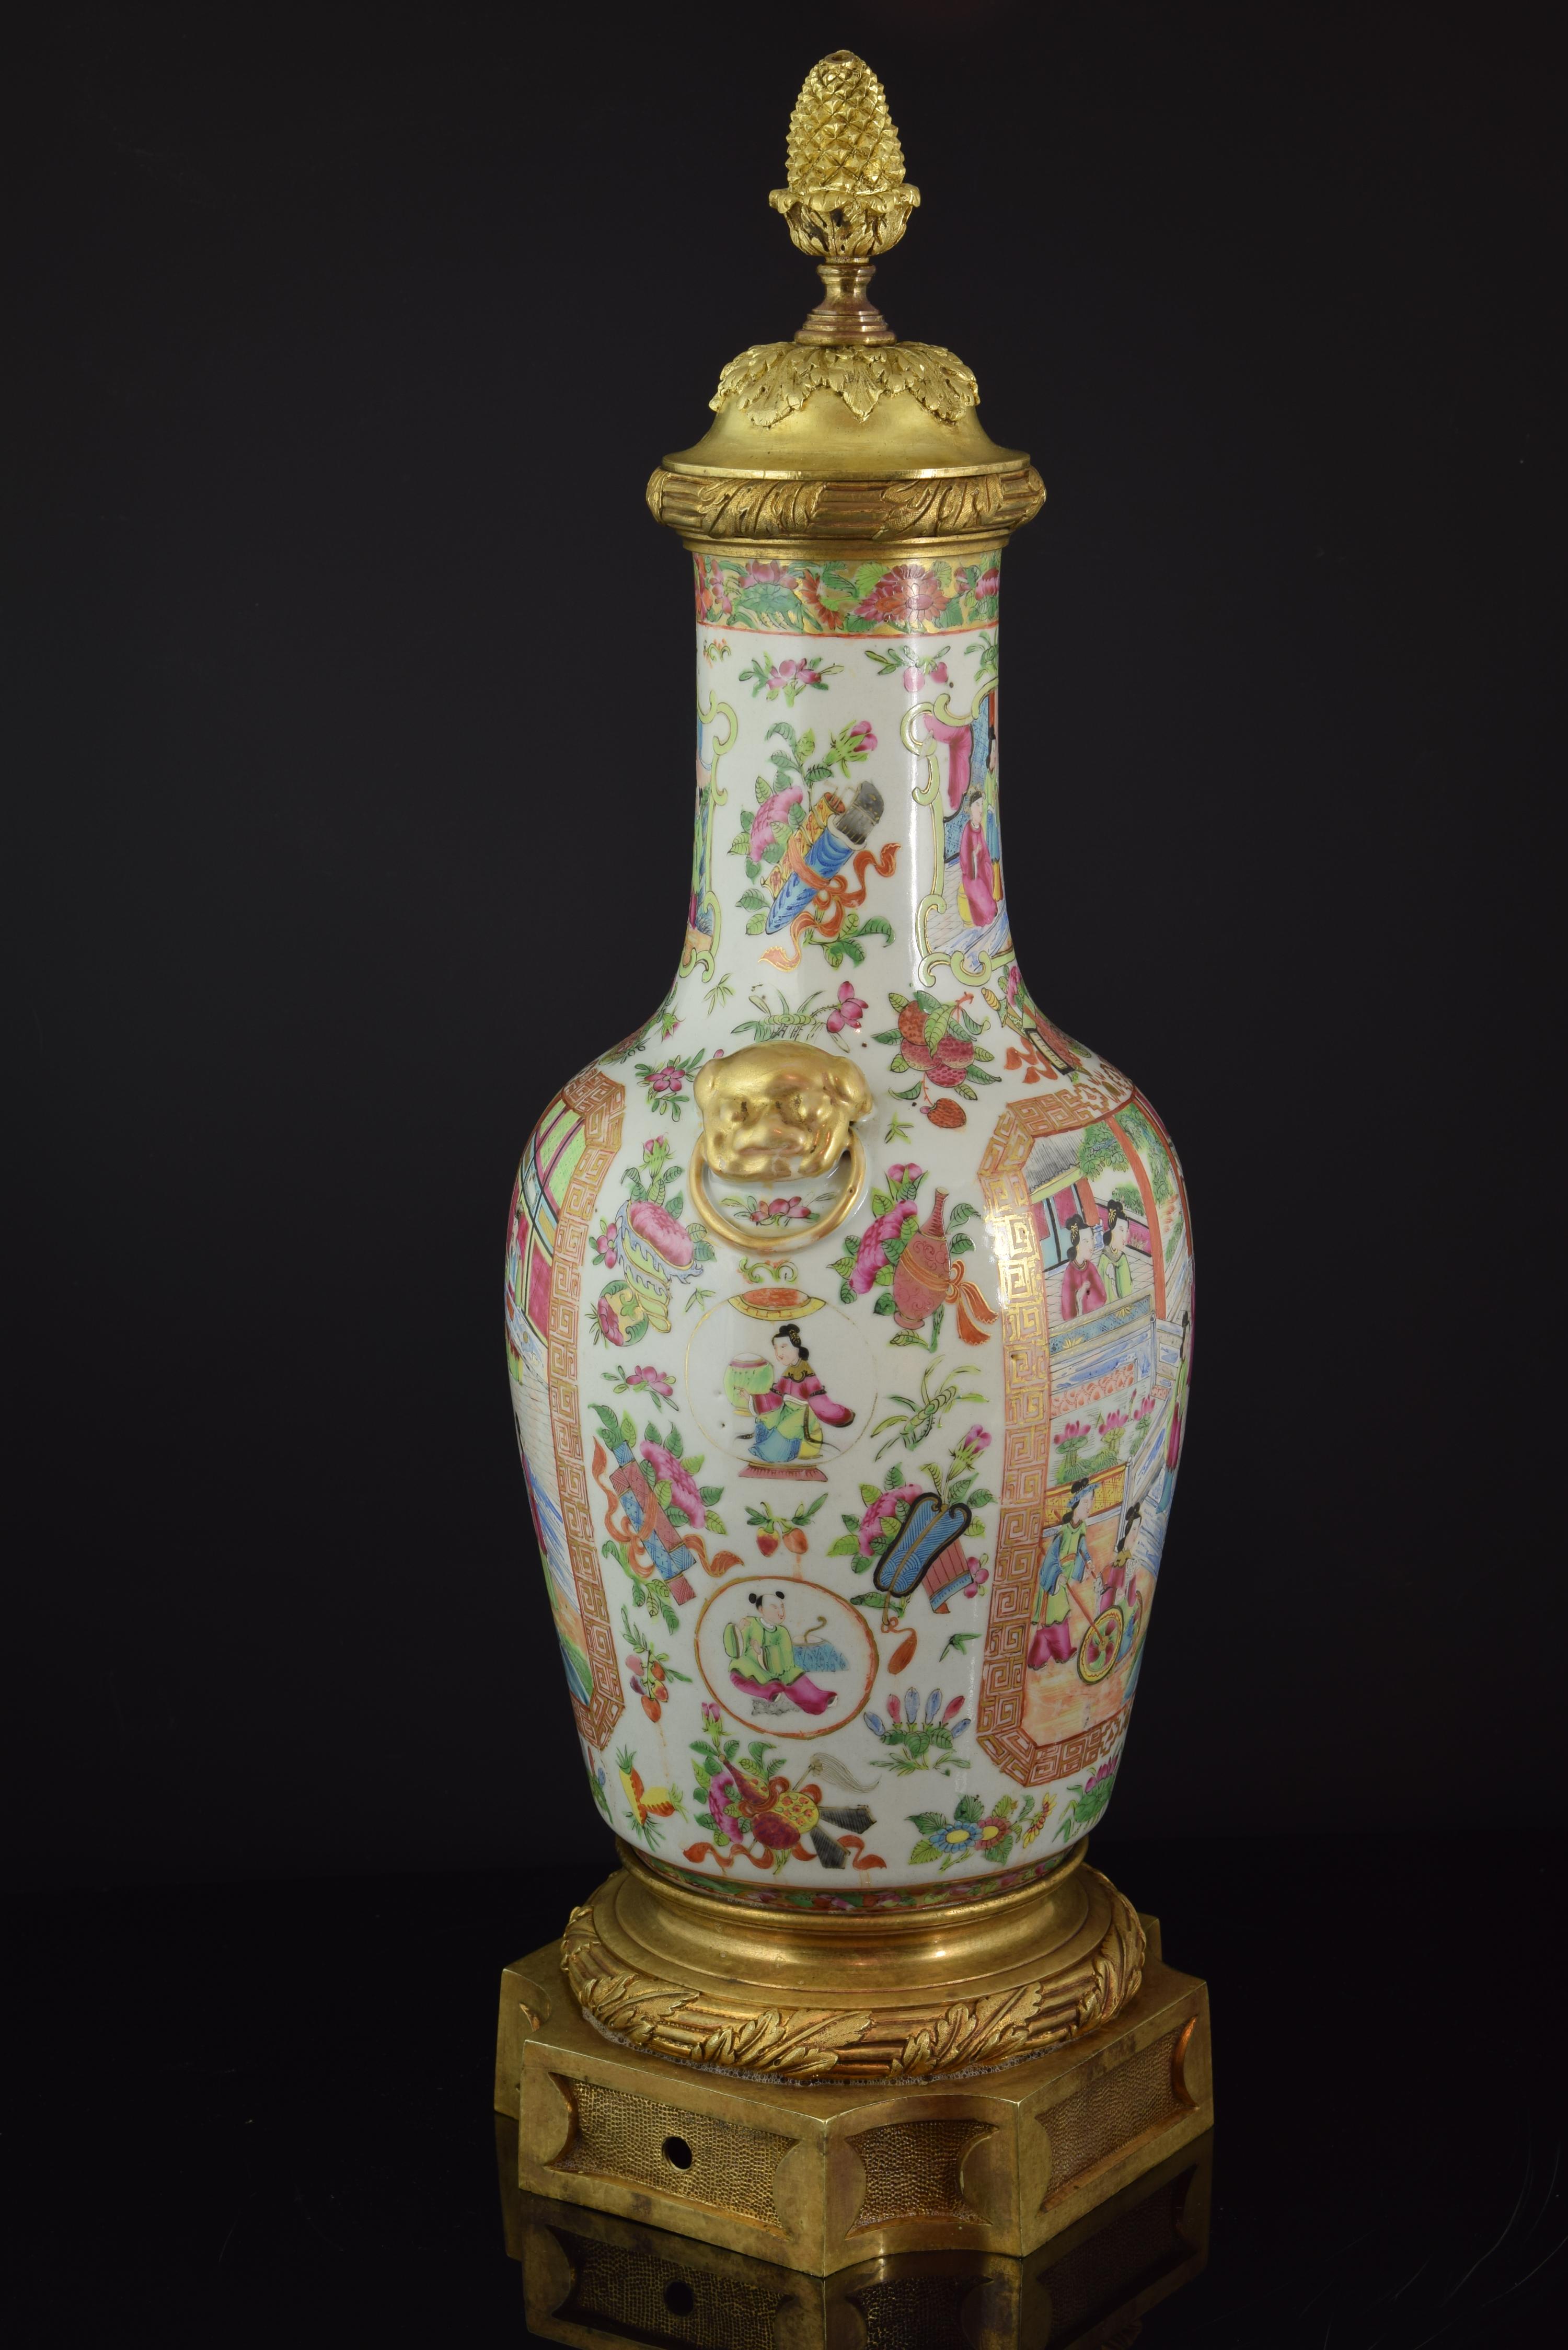 Vase. Porcelain, bronze. Canton, 19th century. 
Porcelain vase enhanced with a series of bronze elements which have a clear influence of models of French Neoclassicism. The vase has two relief masks on the sides in gold (perhaps Fu lions with a